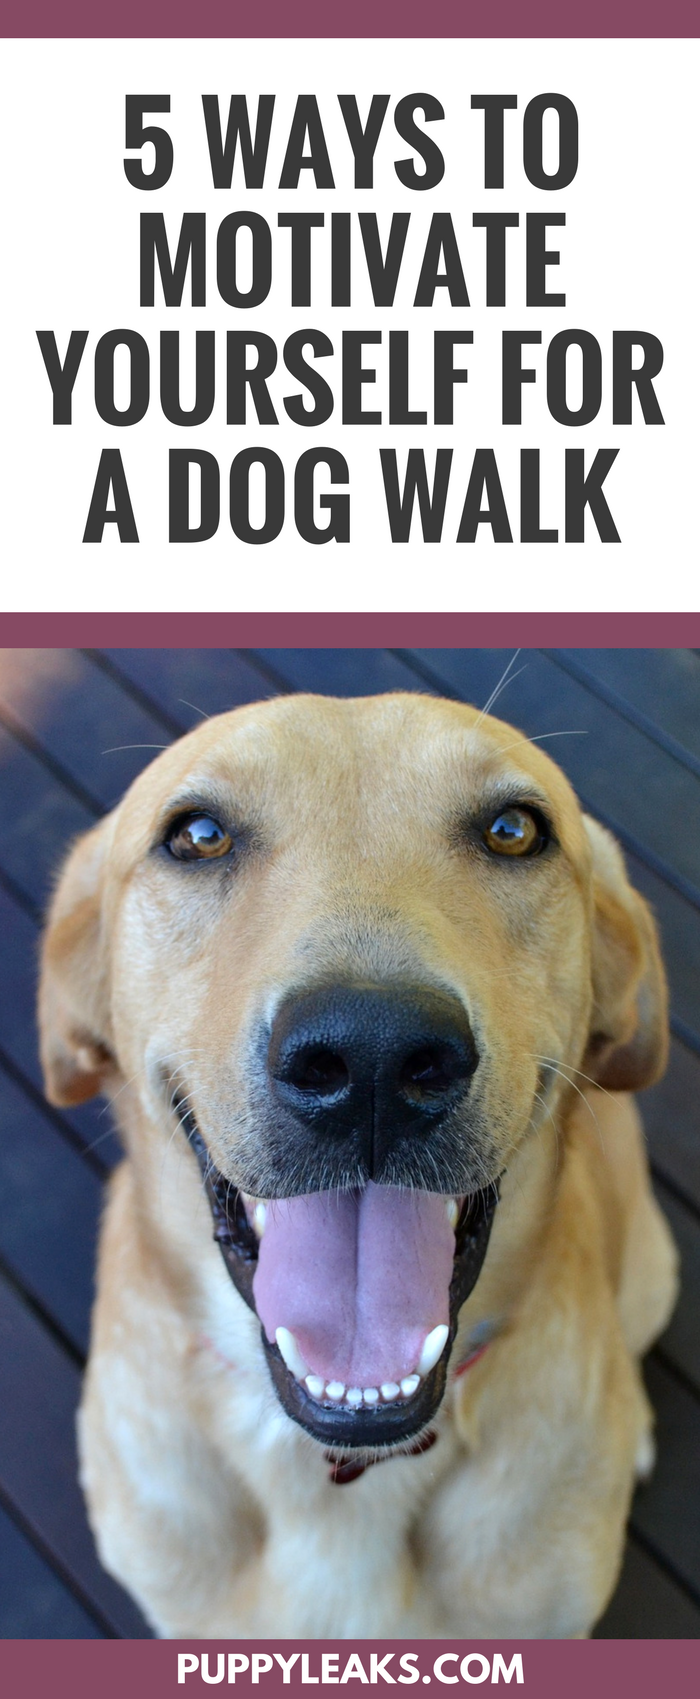 5 Ways to Motivate Yourself for a Dog Walk. Dog walking tips to make your daily walk more fun and enjoyable.